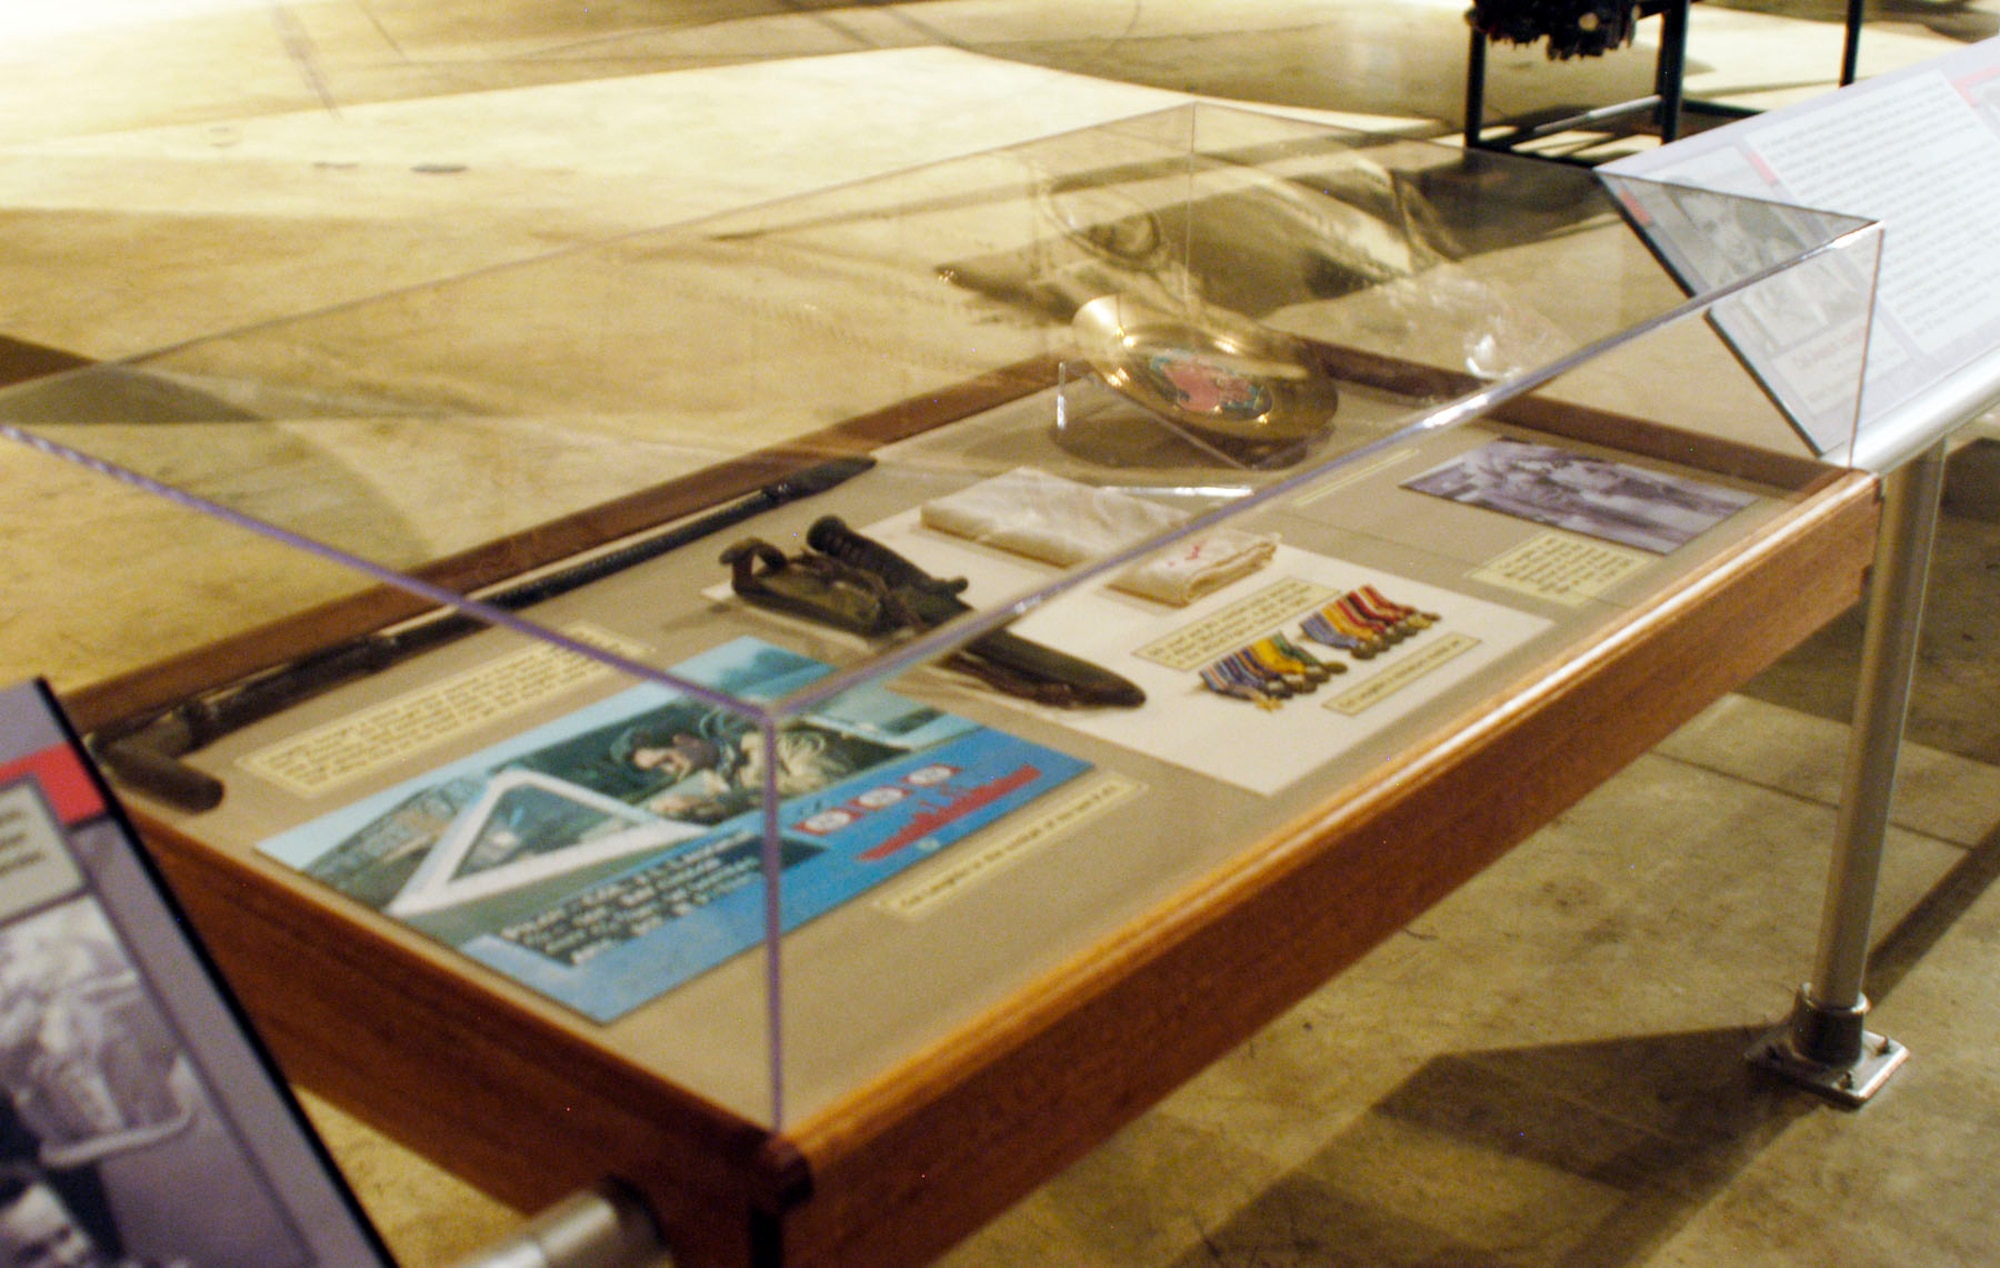 DAYTON, Ohio -- Col. Joseph Laughlin memorabilia in the World War II Gallery at the National Museum of the U.S. Air Force. (U.S. Air Force photo)